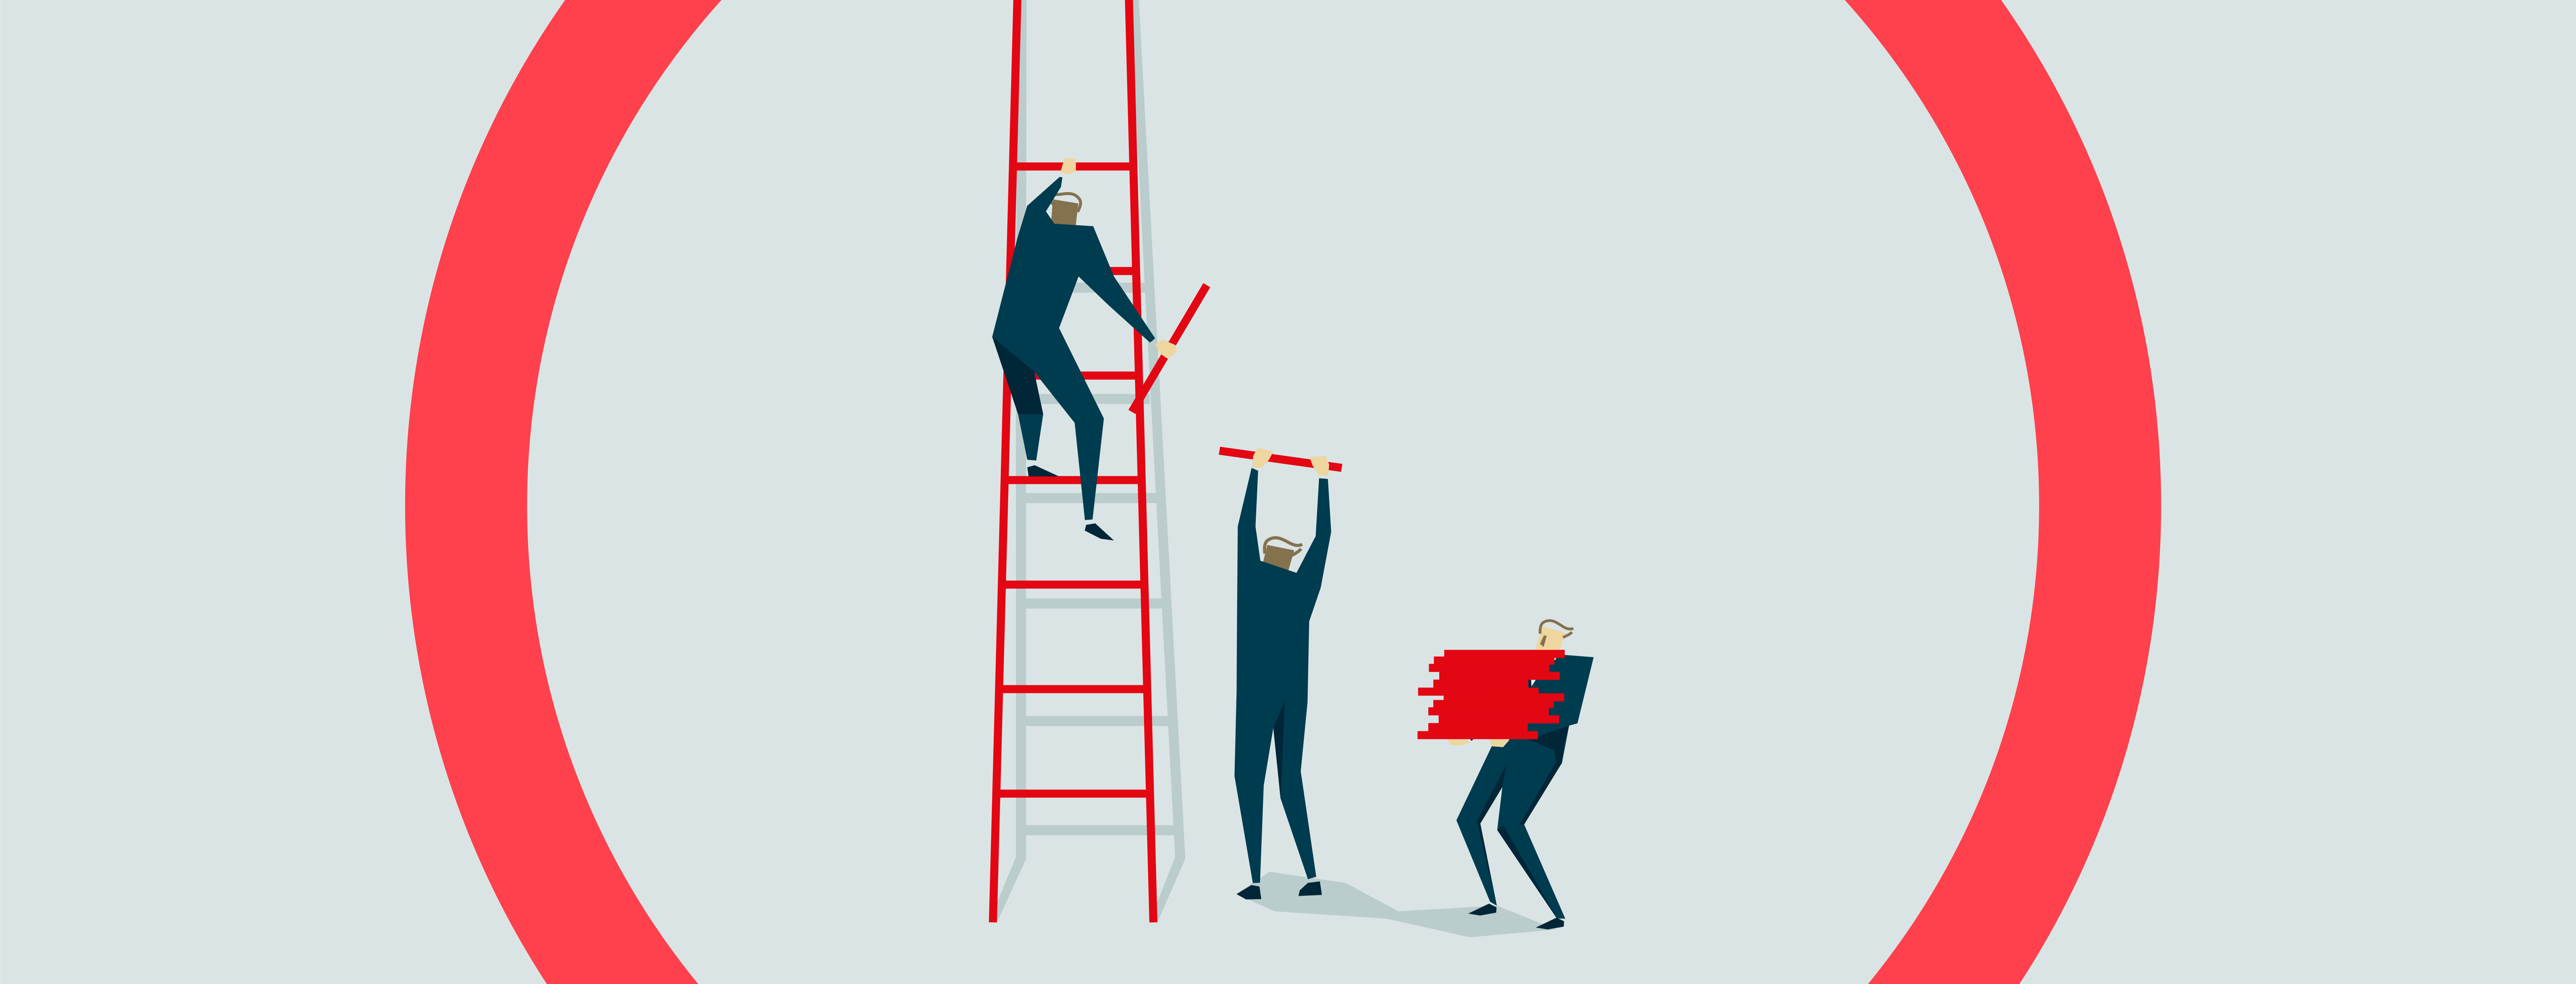 Illustration of three business people building a ladder 